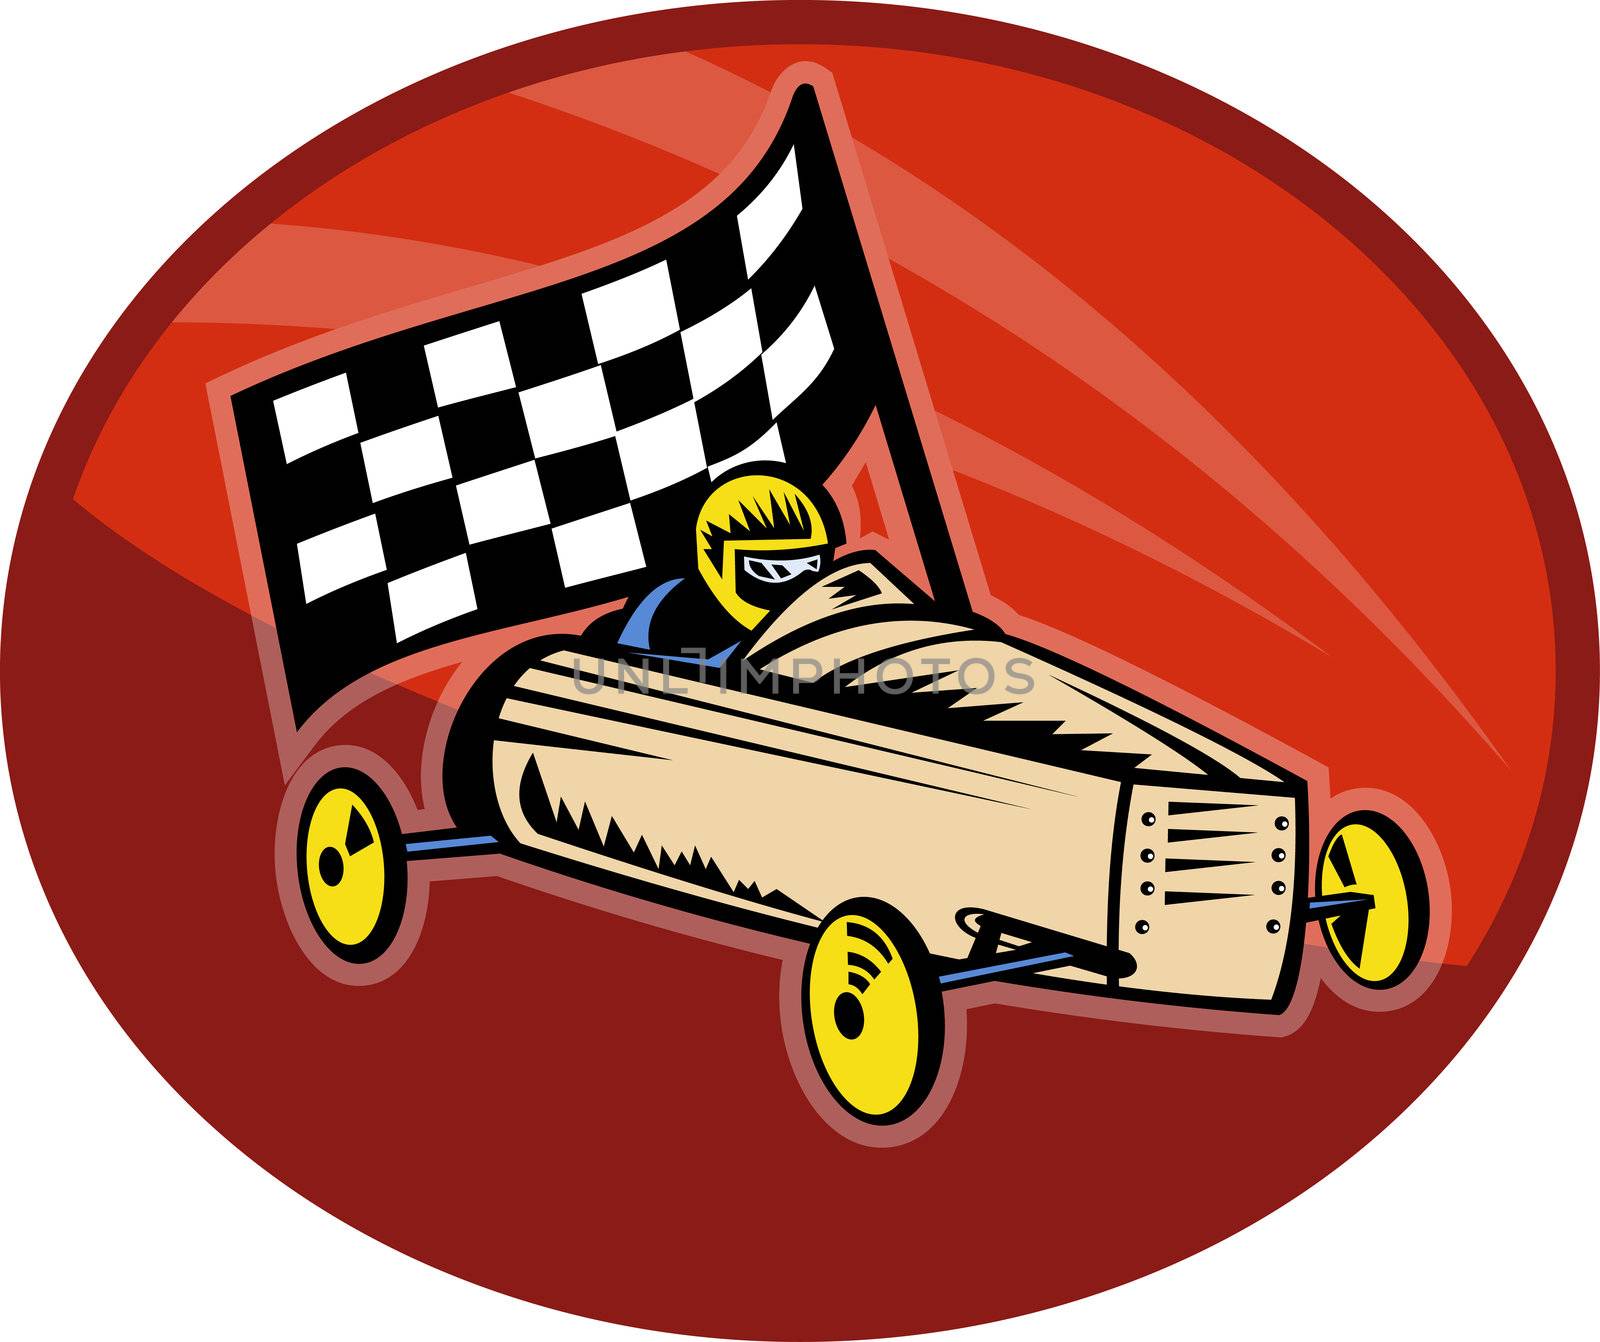 illustration on the sport of Soap box derby racing with race flag